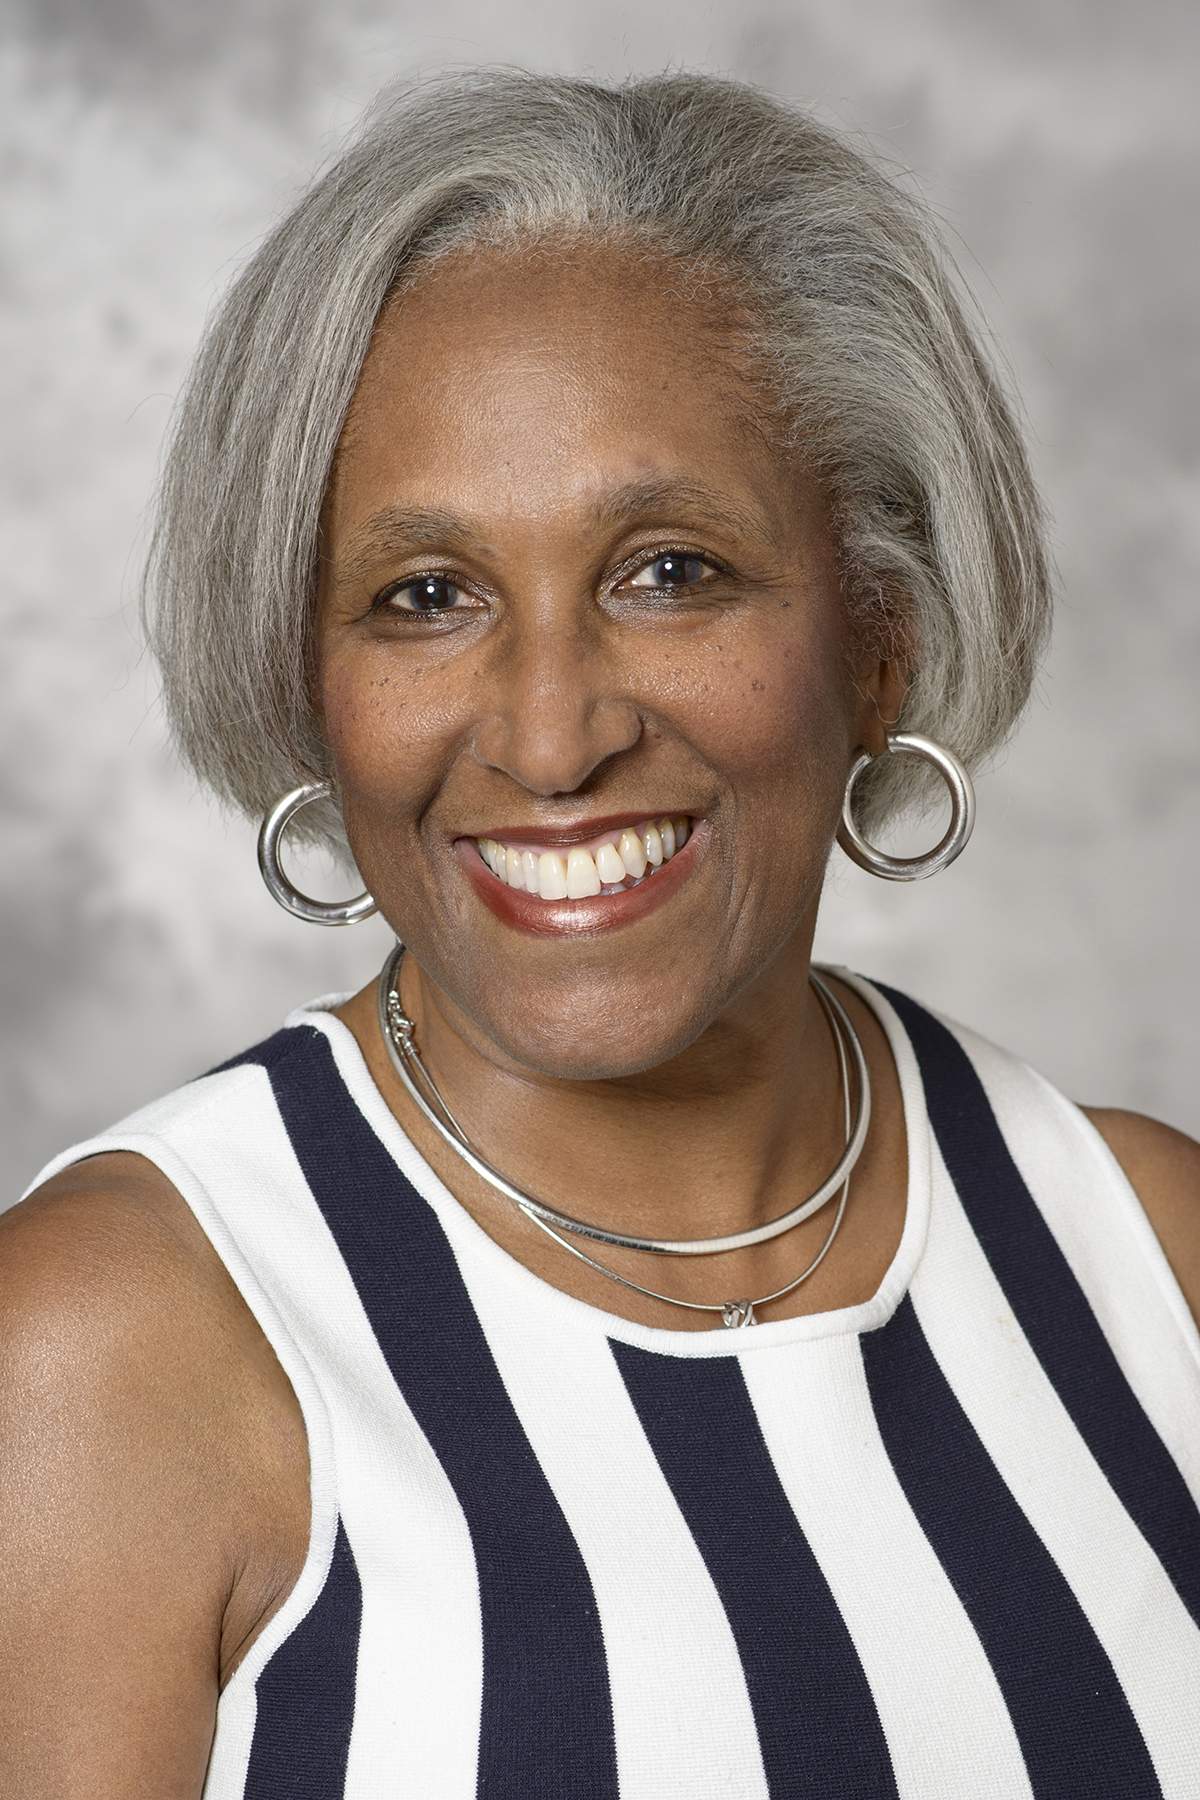 [Photo of a black woman with gray hair wearing a blue-and-white striped sleeveless blouse.]